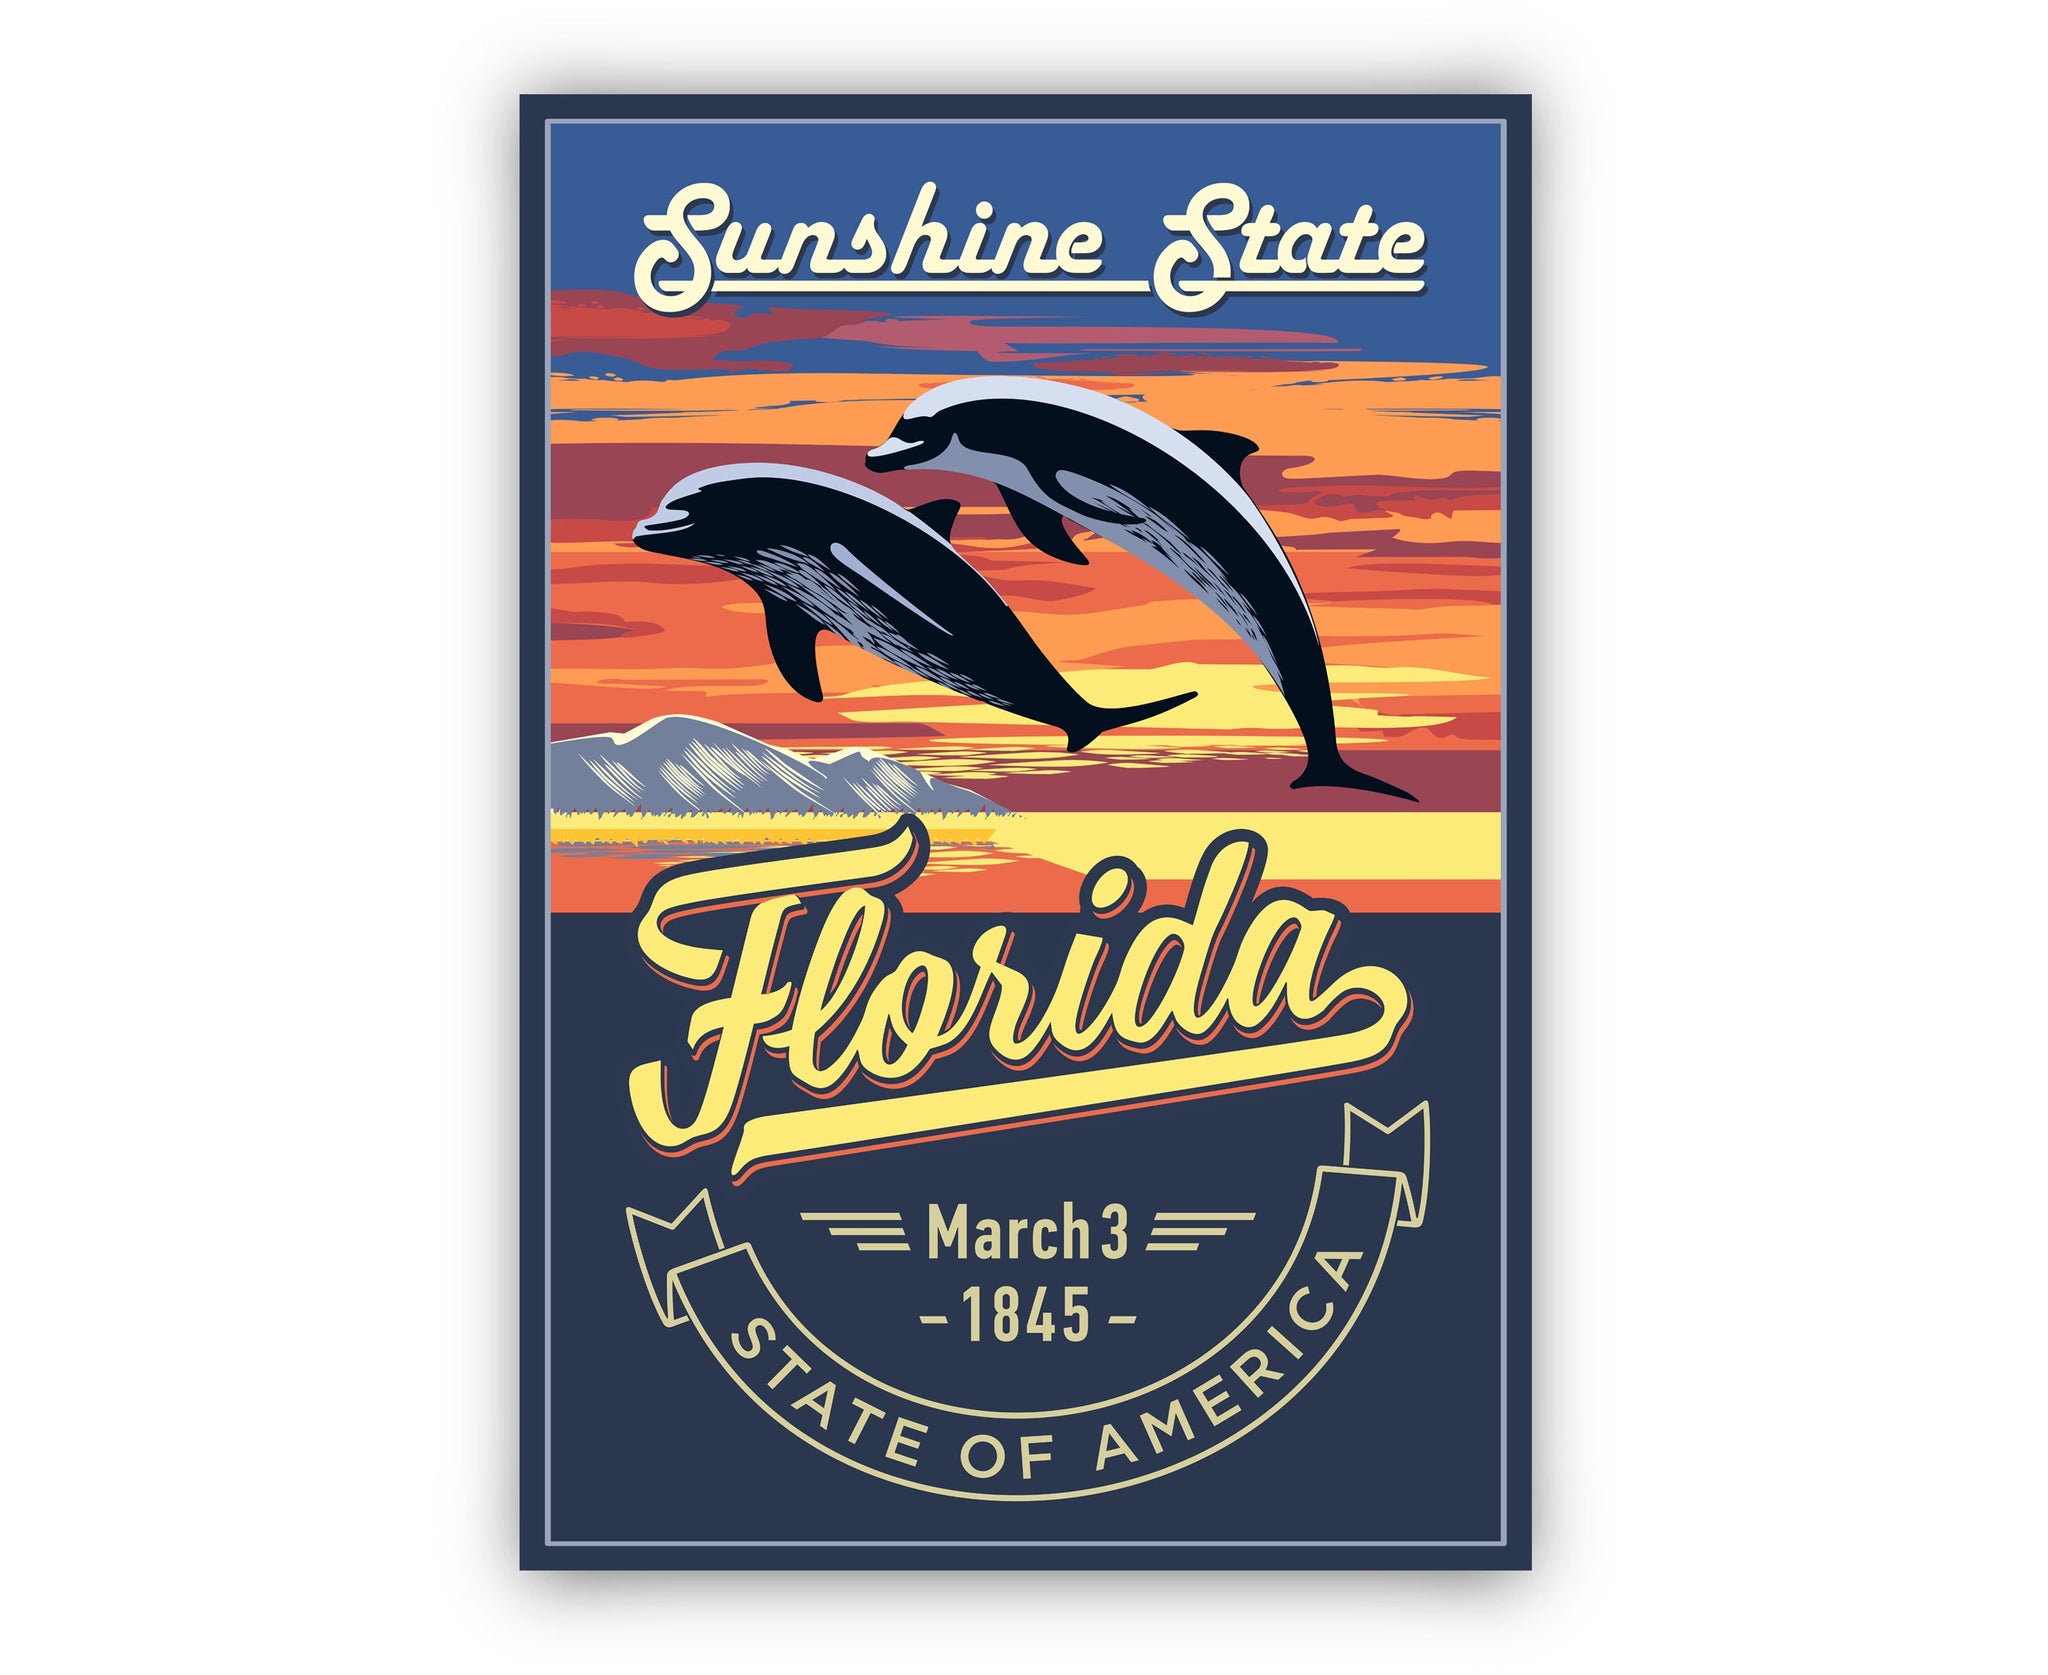 United States Florida State Poster, Florida Poster Print, Florida State Emblem Poster, Retro Travel State Poster, Home and Office Wall Art